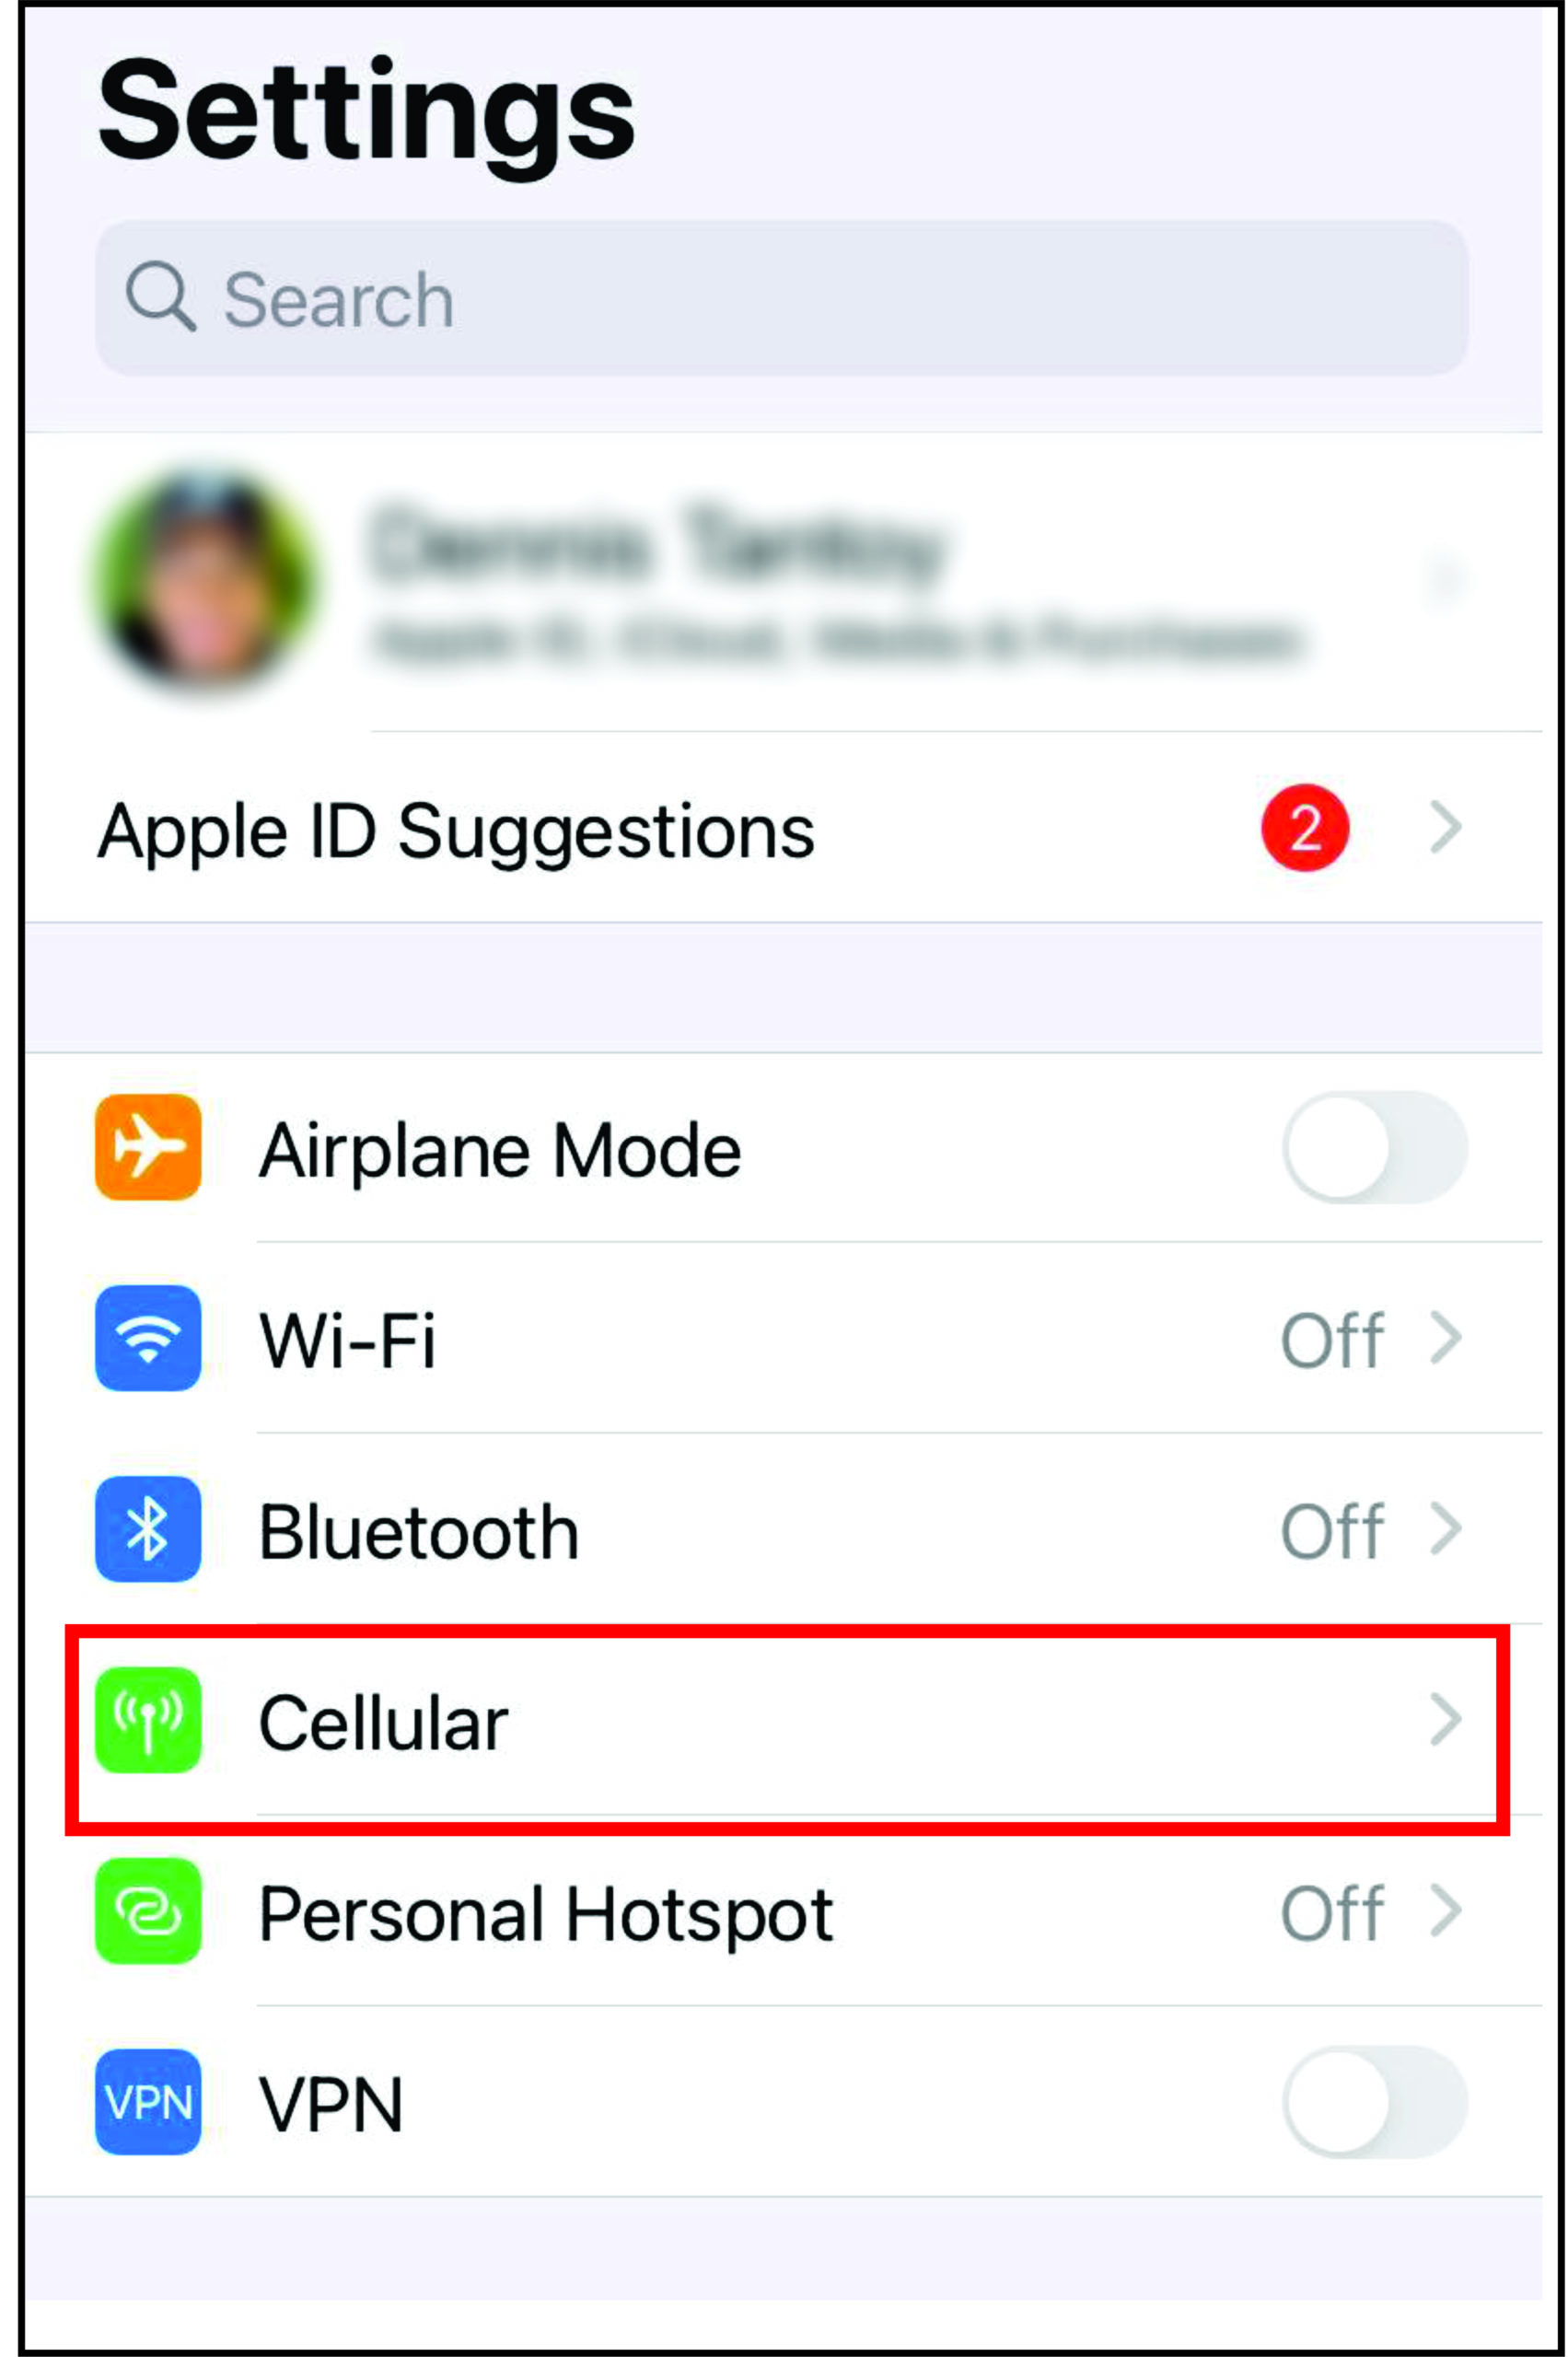 How To Enable A Hotspot On An Iphone